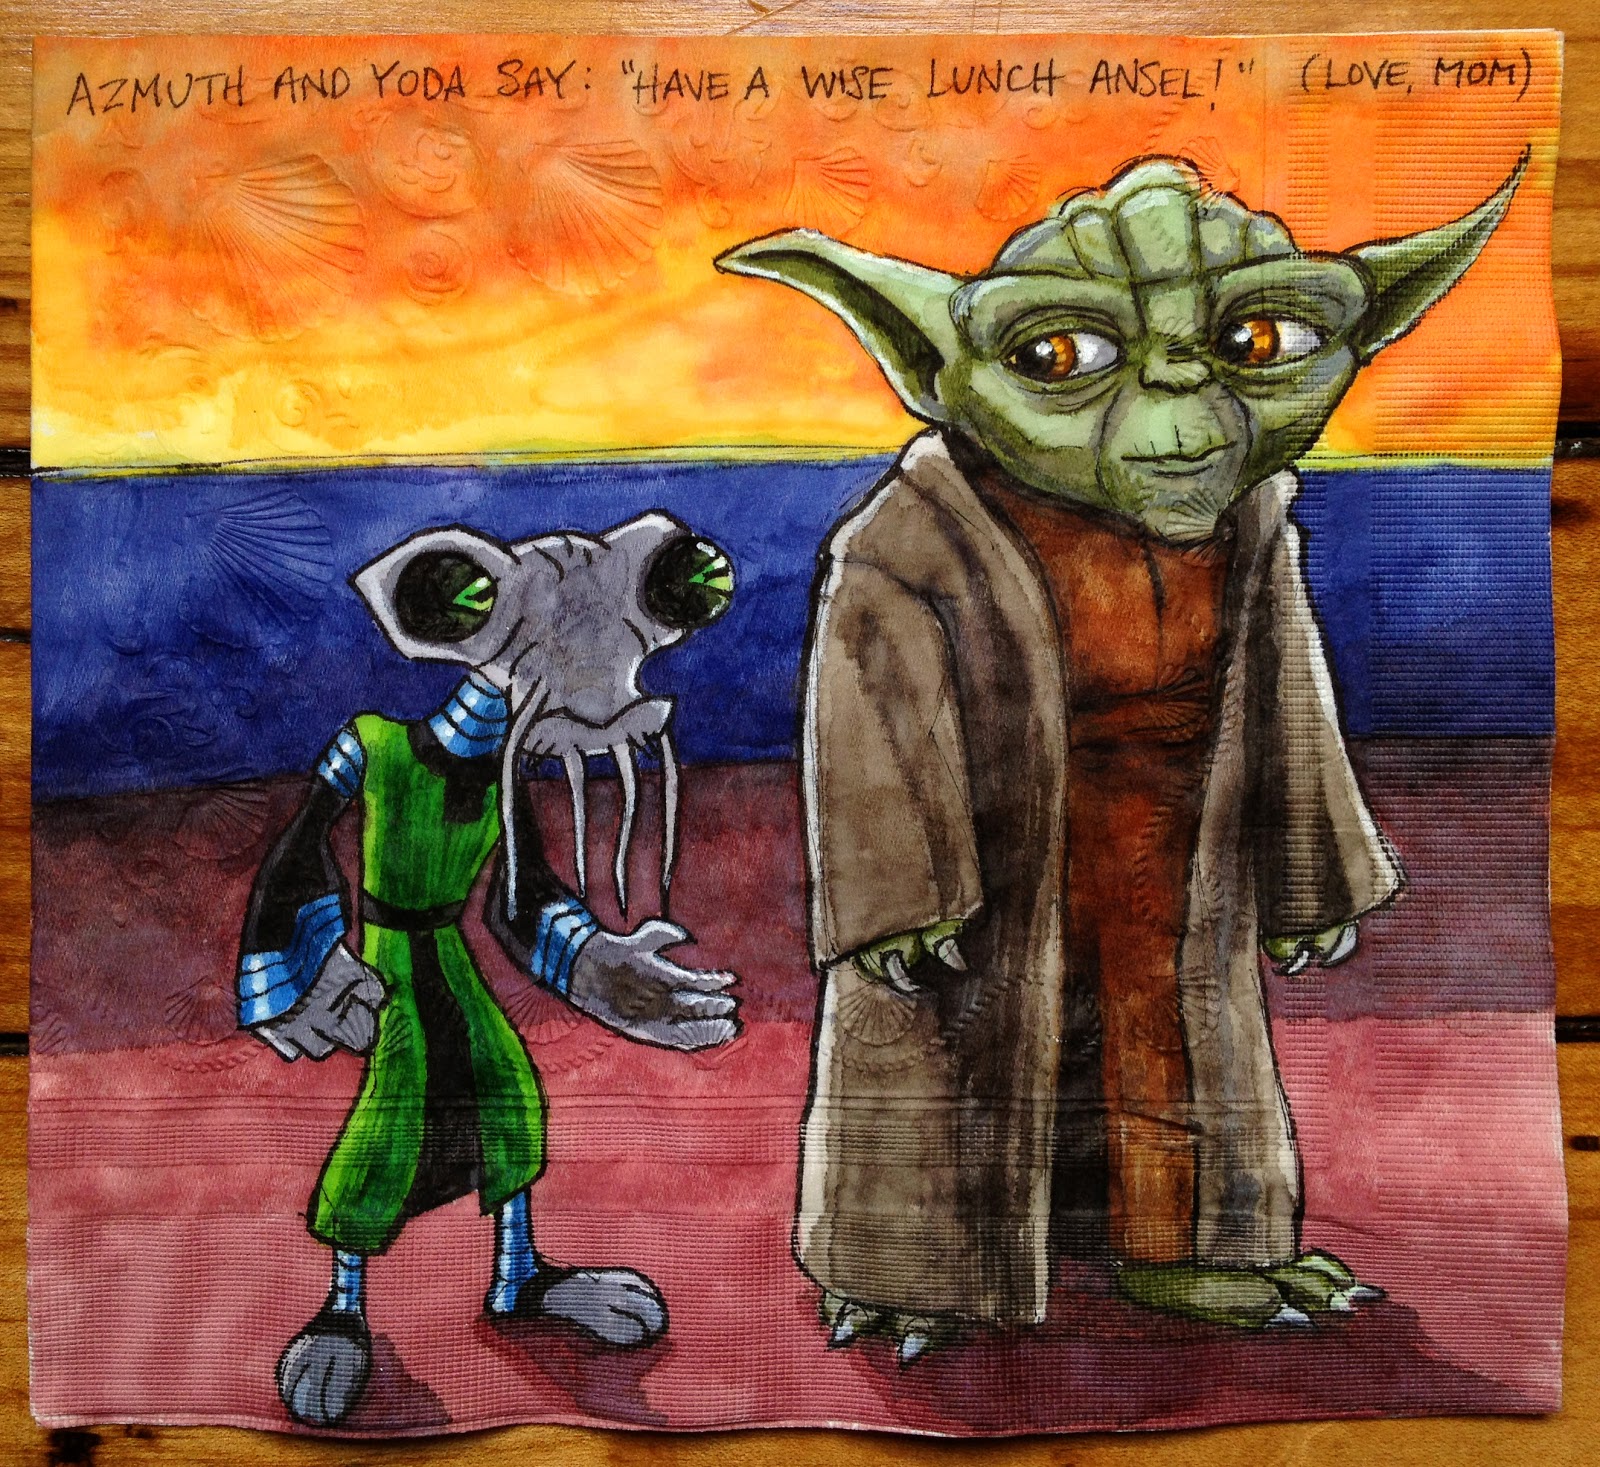 azmuth and yoda - Azmutl. And Yoda Say "Have A Wue Lunch Ansel" Love, Mom